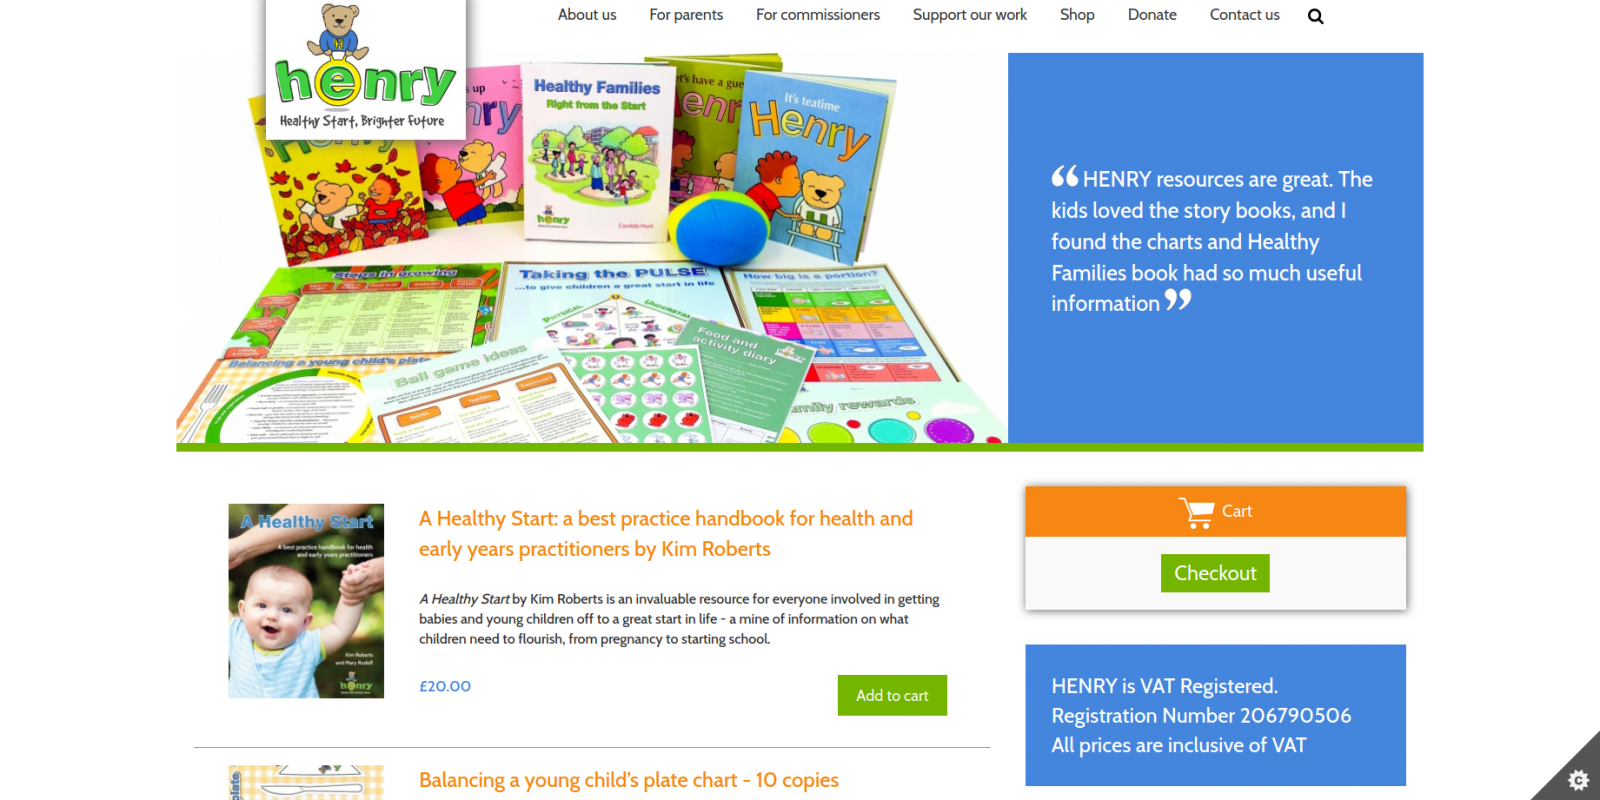 HENRY - shop - resources for practitioners and parents - healthy start